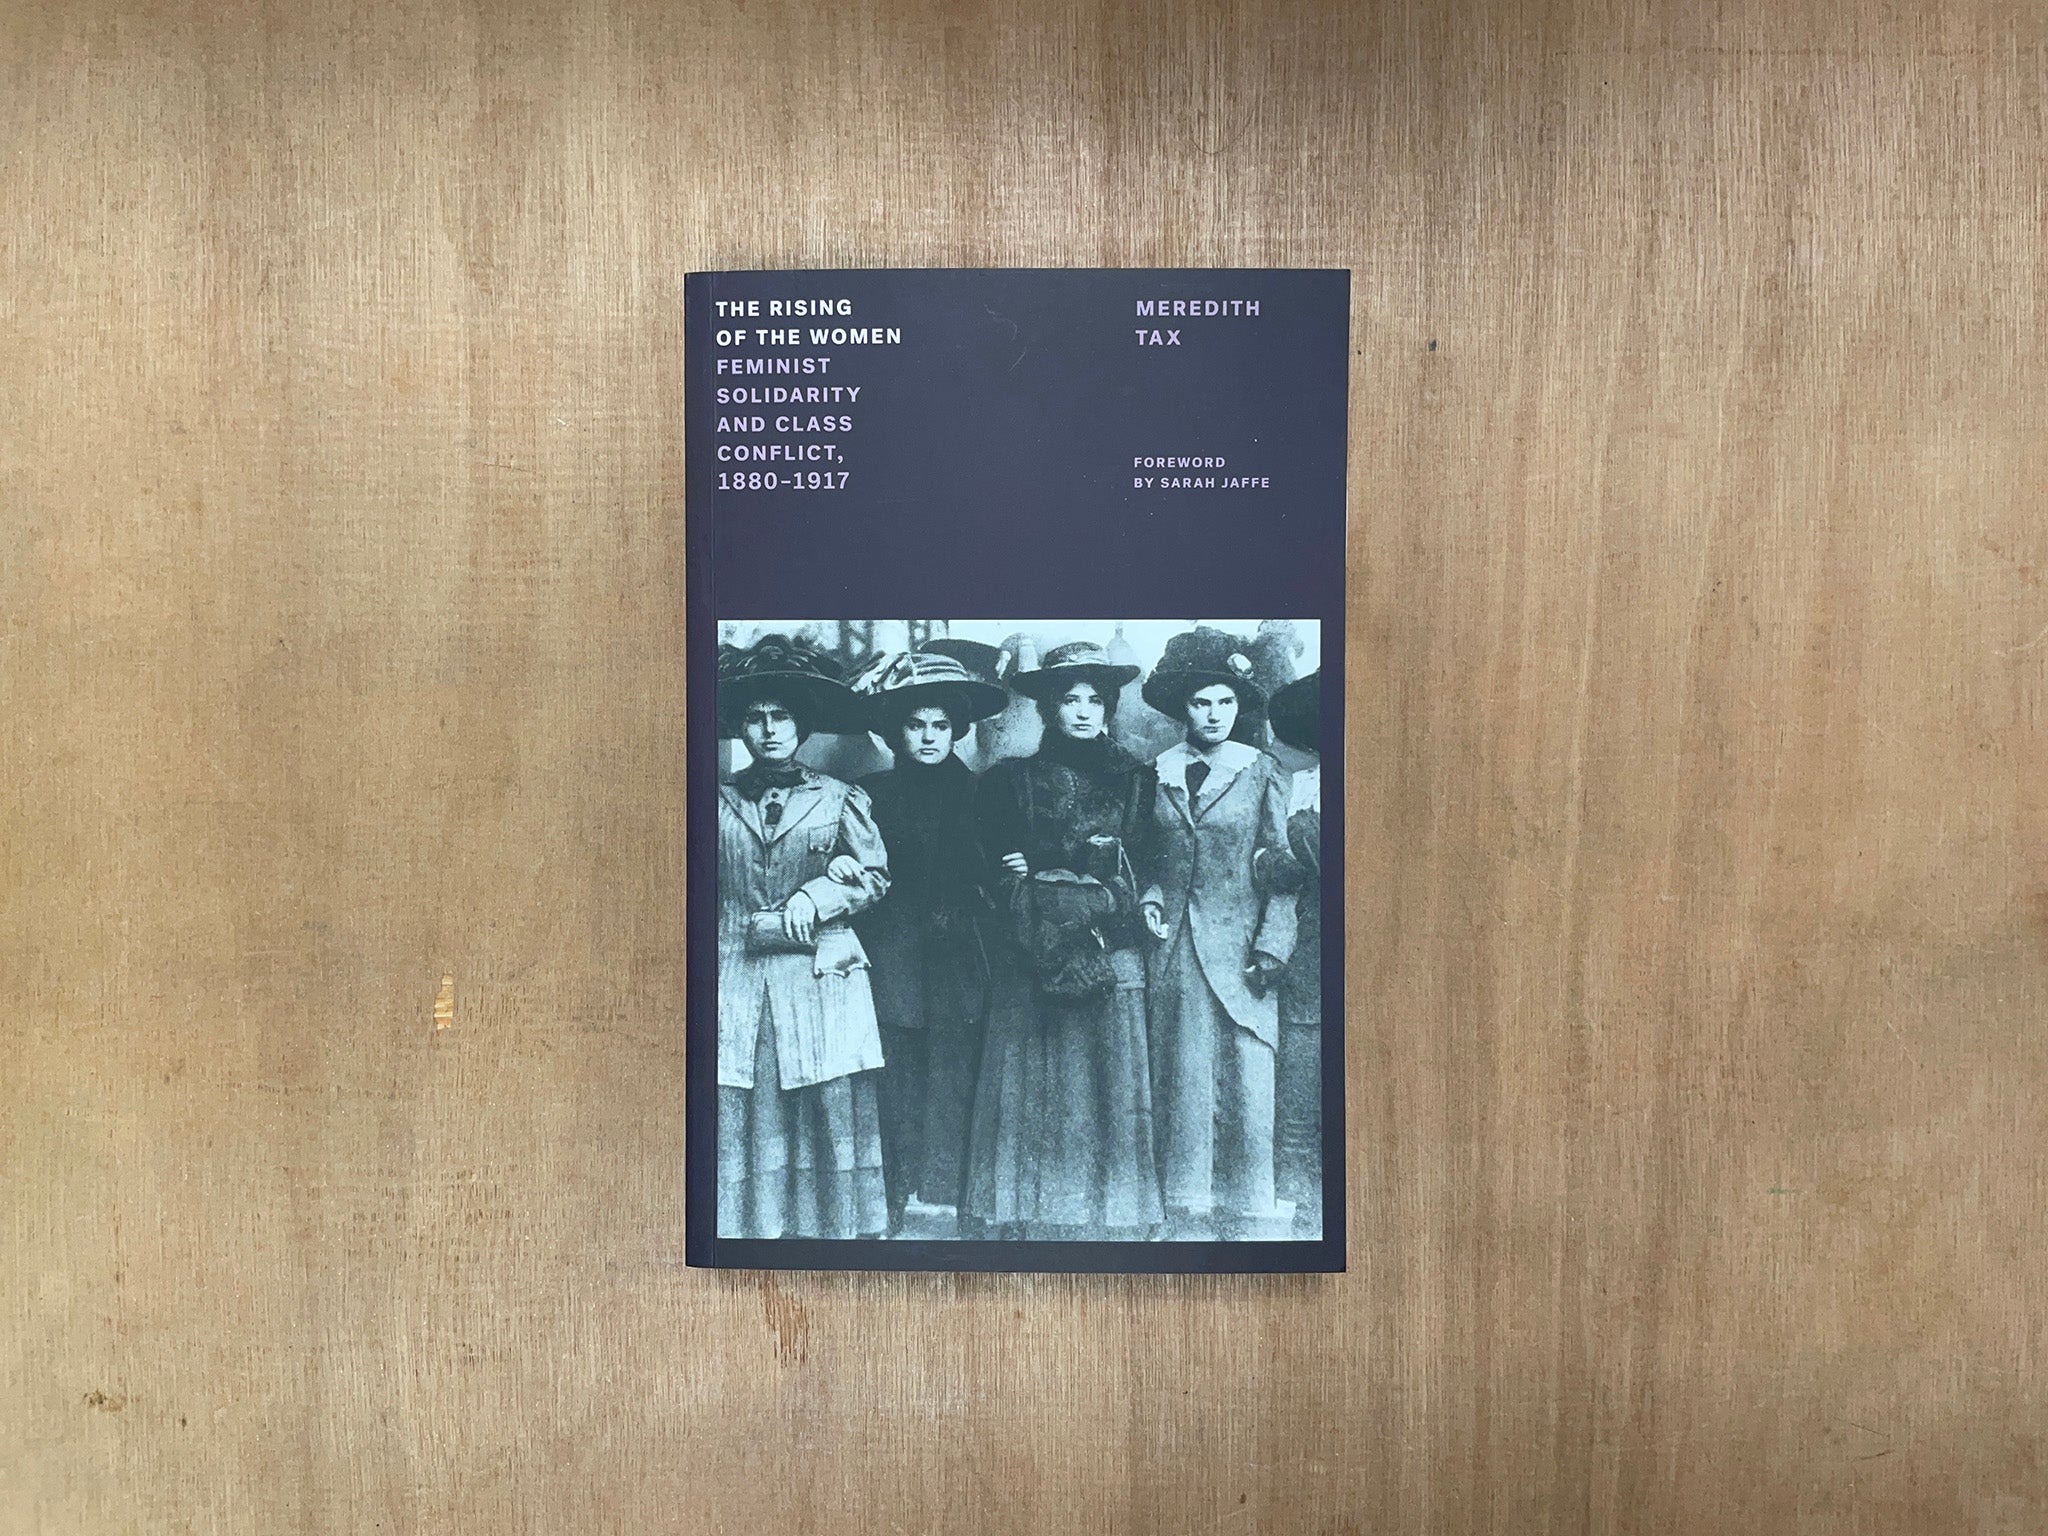 THE RISING OF THE WOMEN: FEMINIST SOLIDARITY AND CLASS CONFLICT, 1880–1917 by Meredith Tax